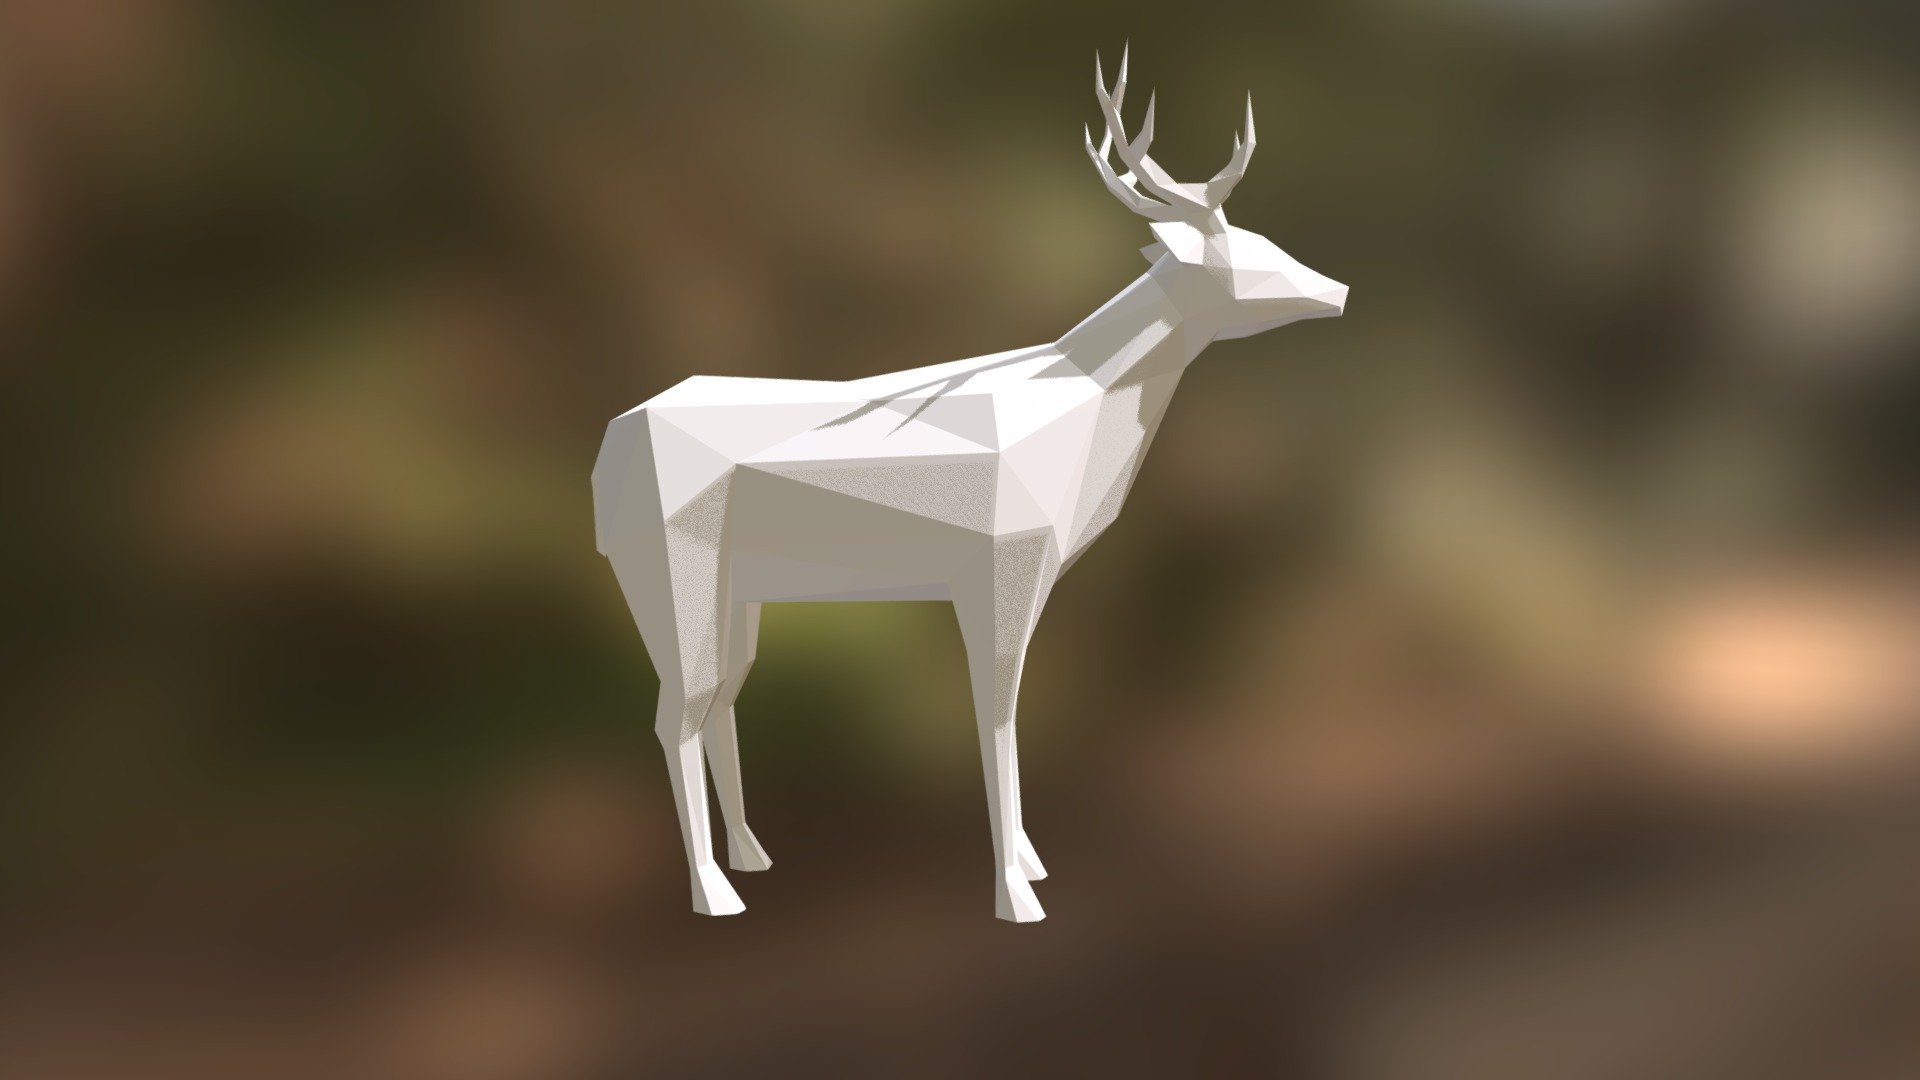 Low Poly 3D model for 3D printing. Deer Low Poly sculpture.  You can find this model for 3D printing in my shop:  -link removed-  Reference model: http://www.cadnav.com - Deer low poly model for 3D printing - 3D model by Peolla3D 3d model